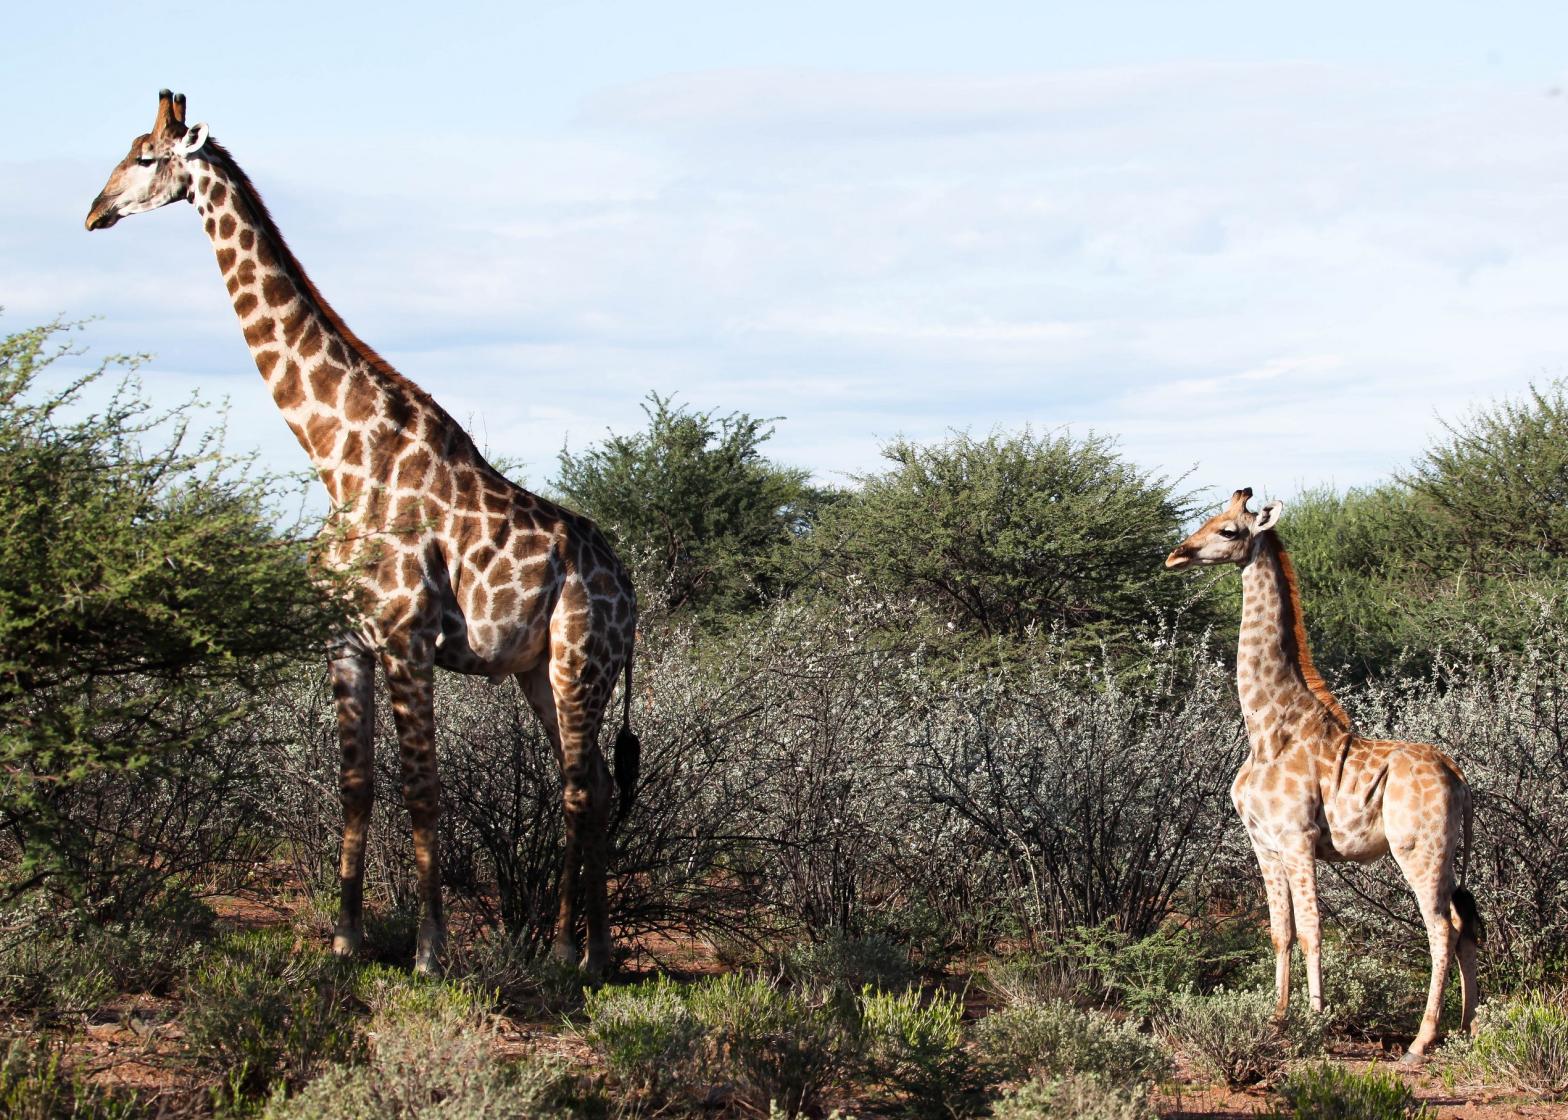 The dwarf giraffe Nigel (right) next to an adult male (left) in Namibia, March 2018 (Photo: Emma Wells, GCF)